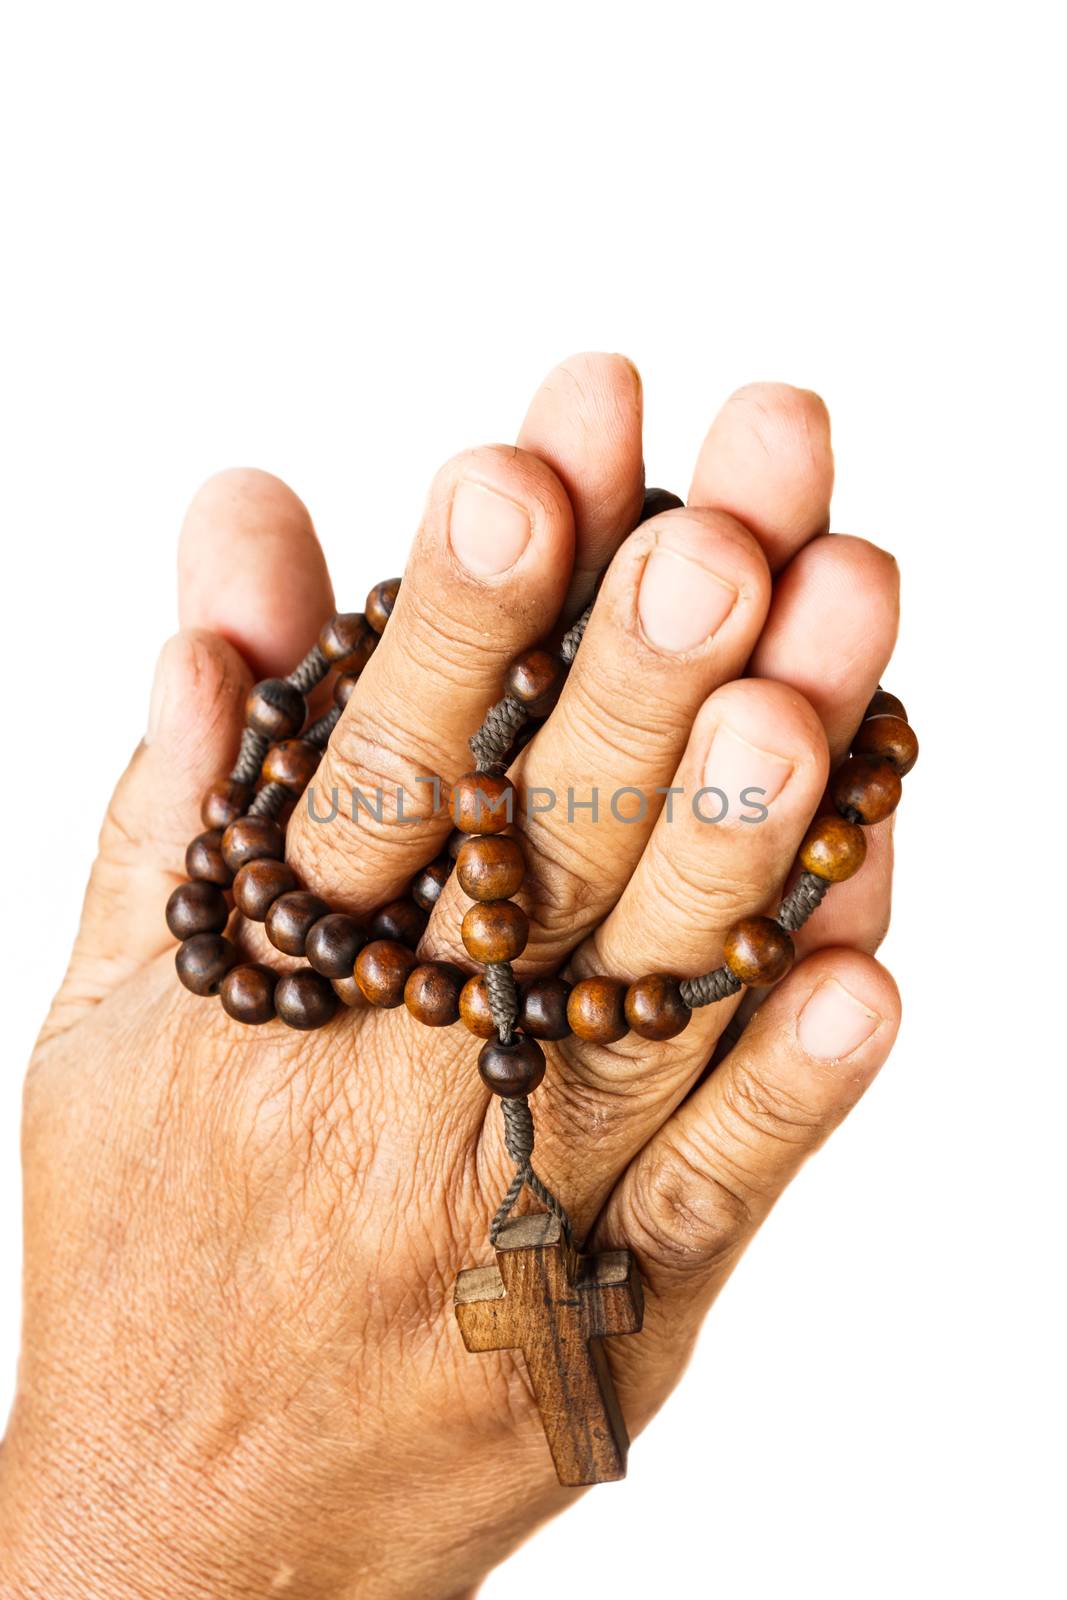 hands of old aged human were binded by wood rosary on white background (isolated)